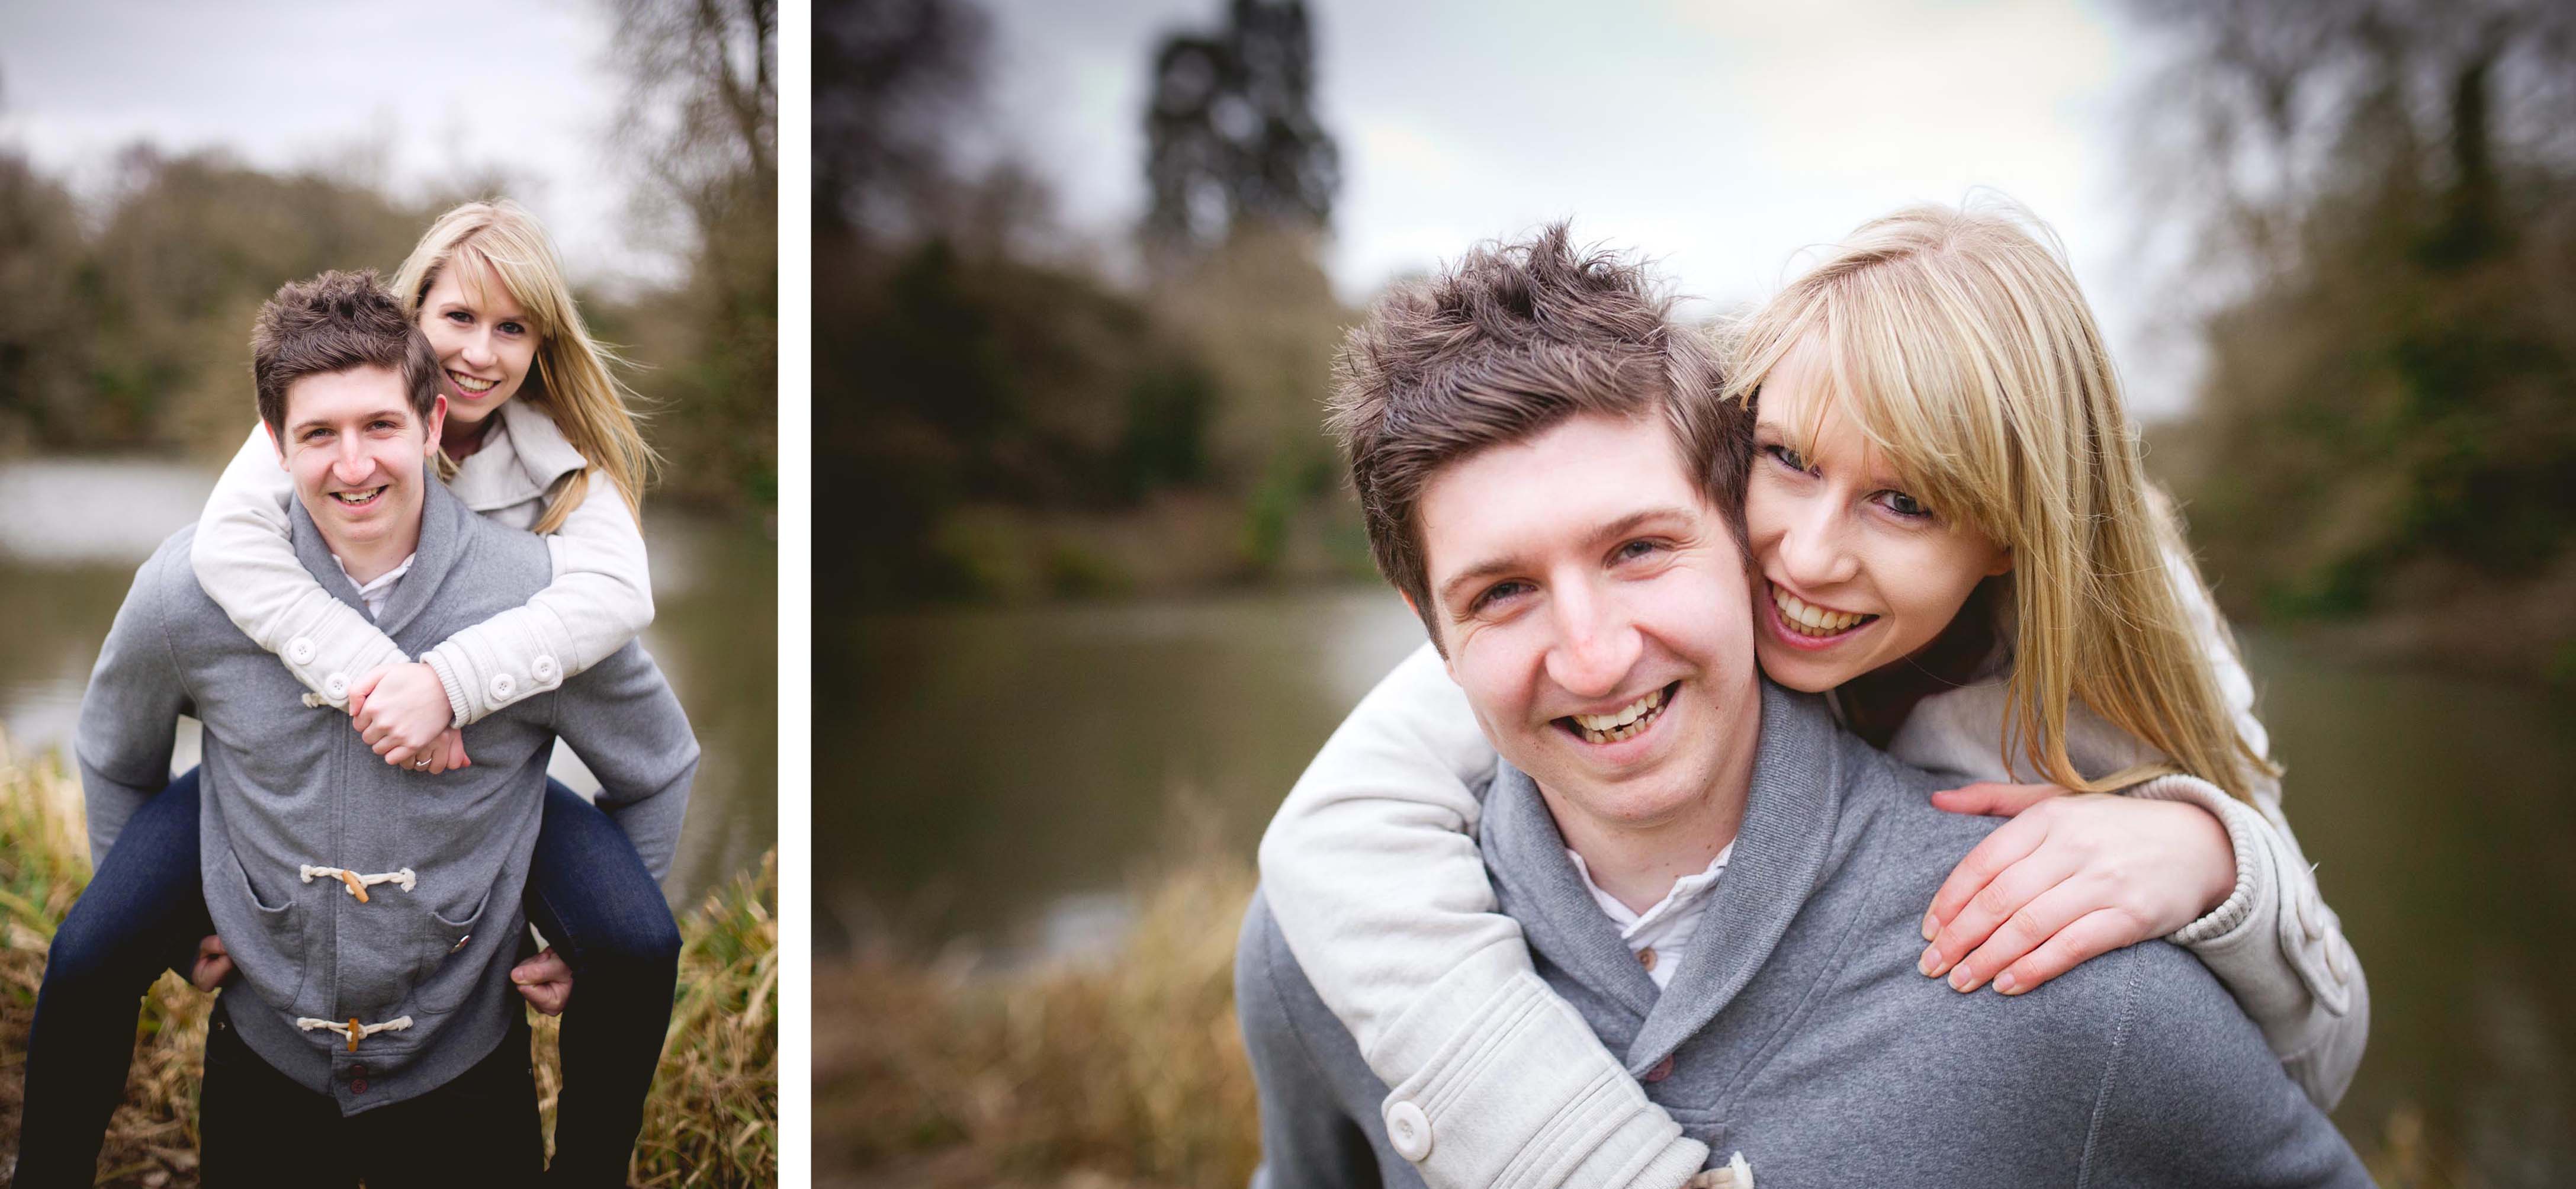 Couple Portrait Session in the Park | Catherine Barnes Photography